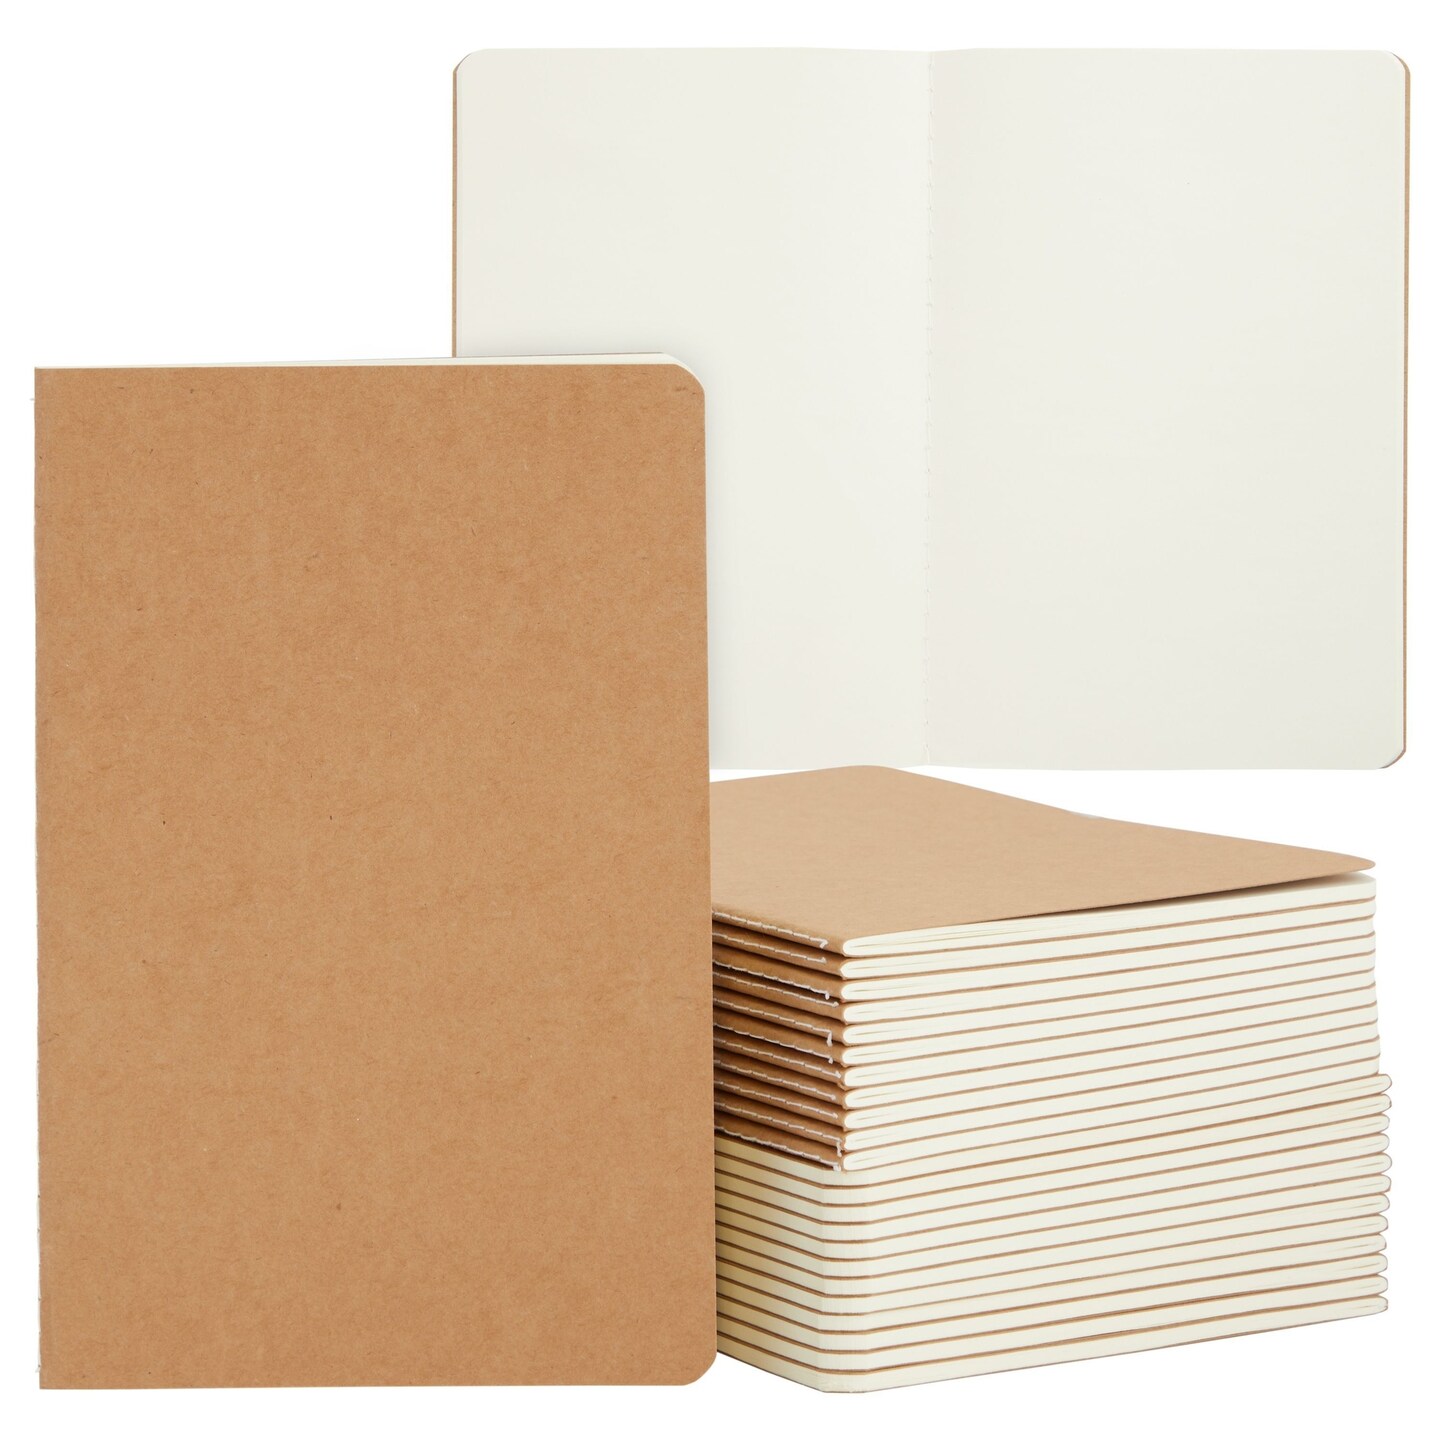 Unruled Notebook: Unlined/Plain Notebook, Non Lined, 100 Blank Pages,  Lineless Notebook / Journal for Adults, Men, Women, Students, Visual Note